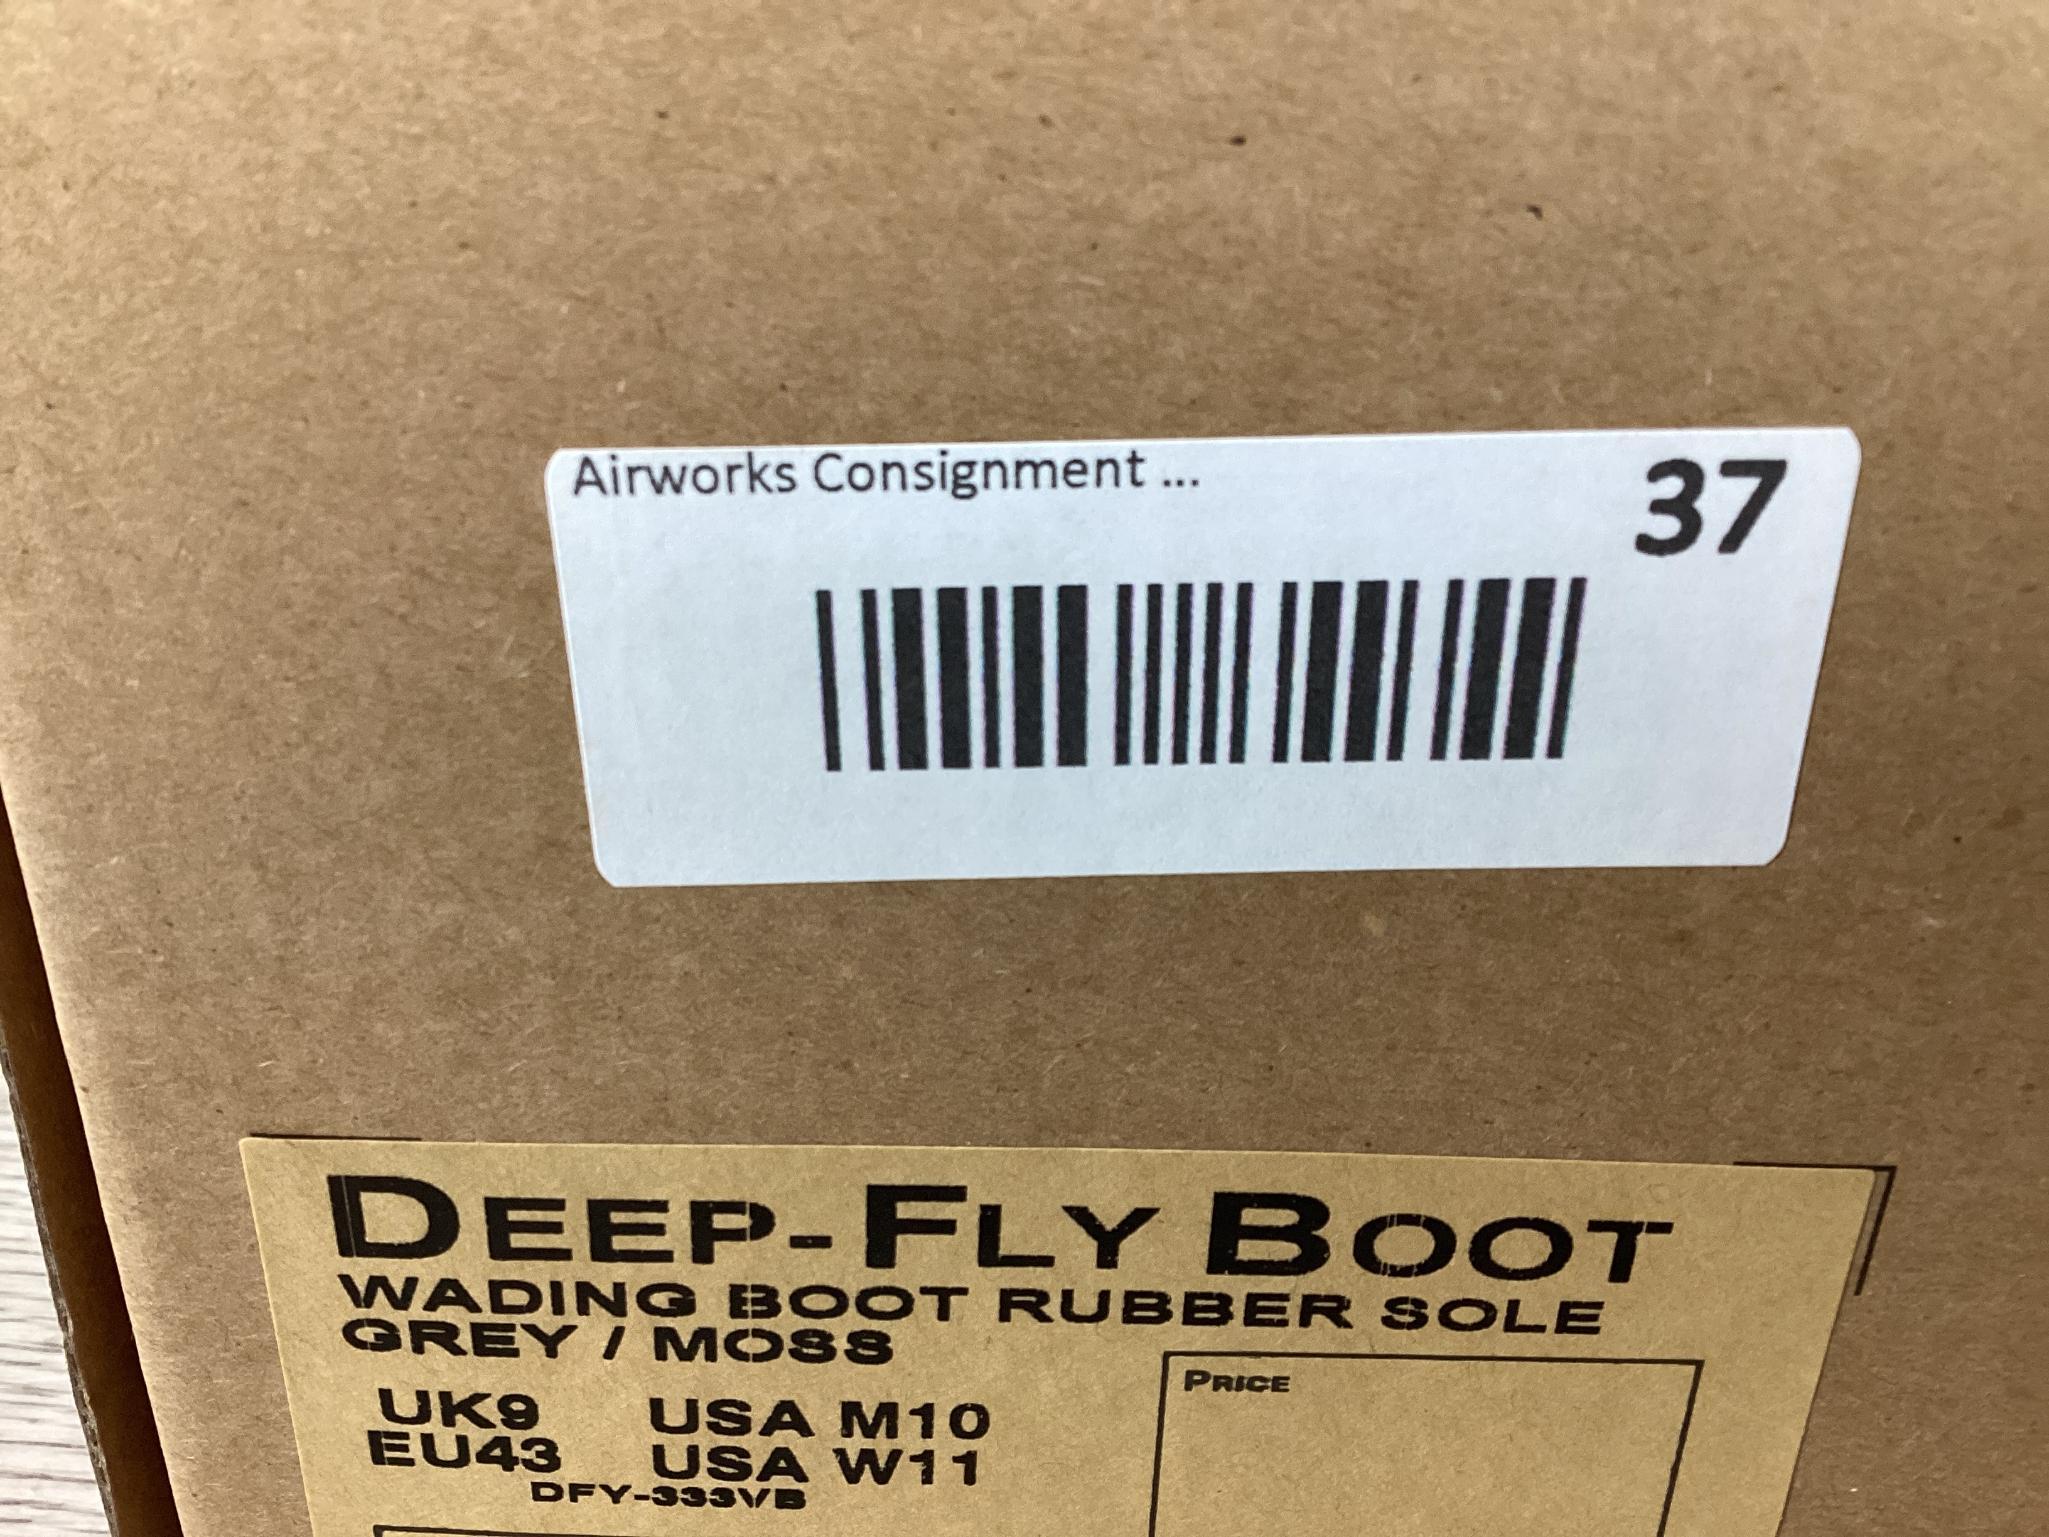 DEEP FLY 5.0 8" M10/W11 MOSS PRODUCT # #393.0330